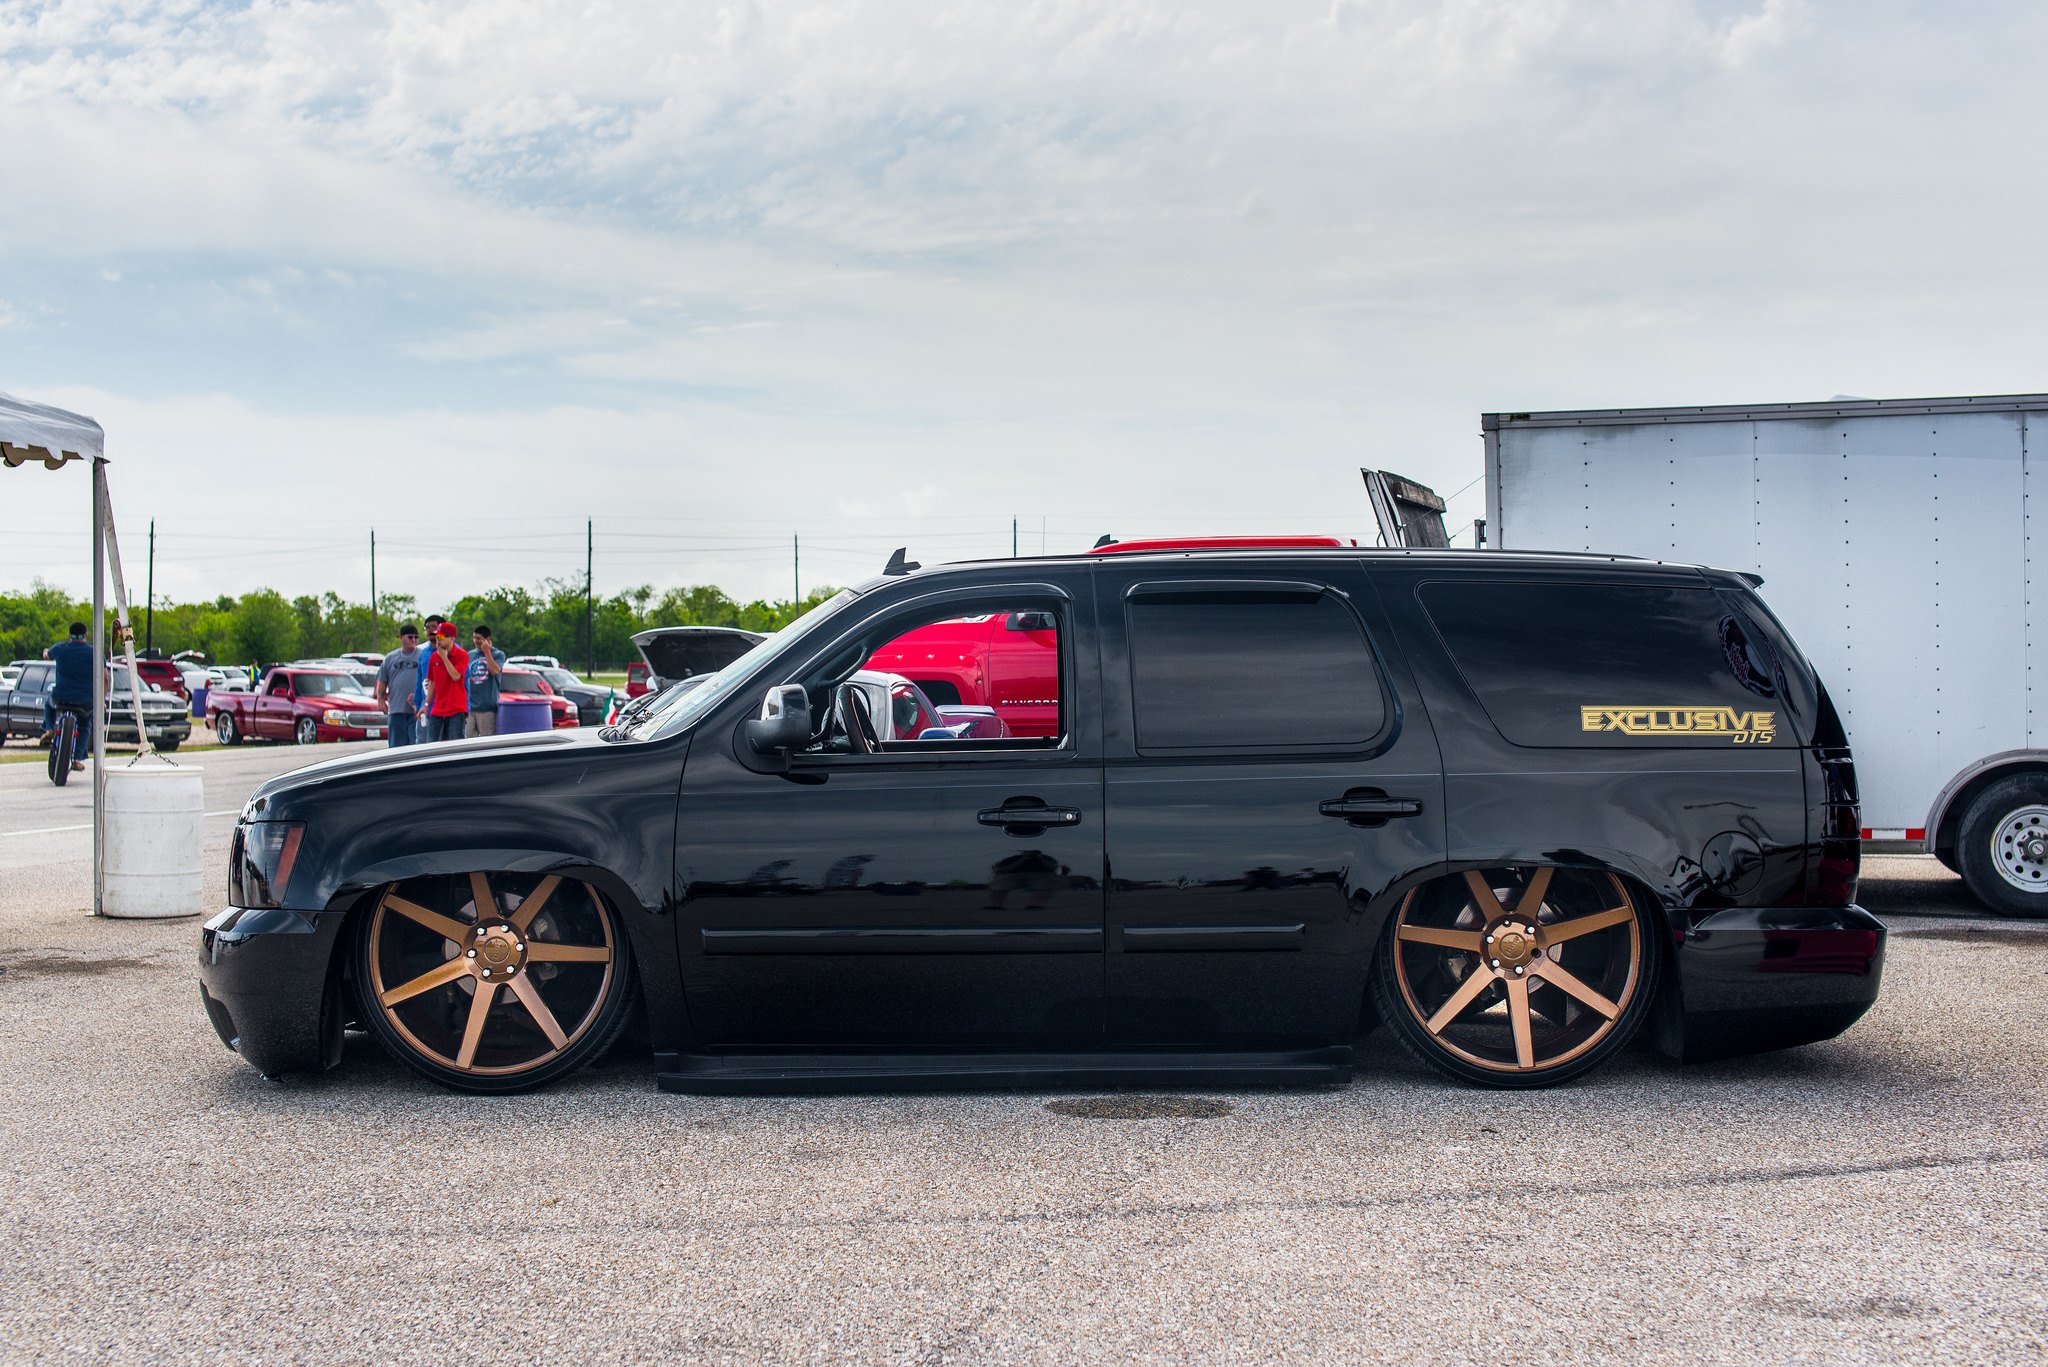 Heavy Modified Chevy Tahoe Attention Stealer.